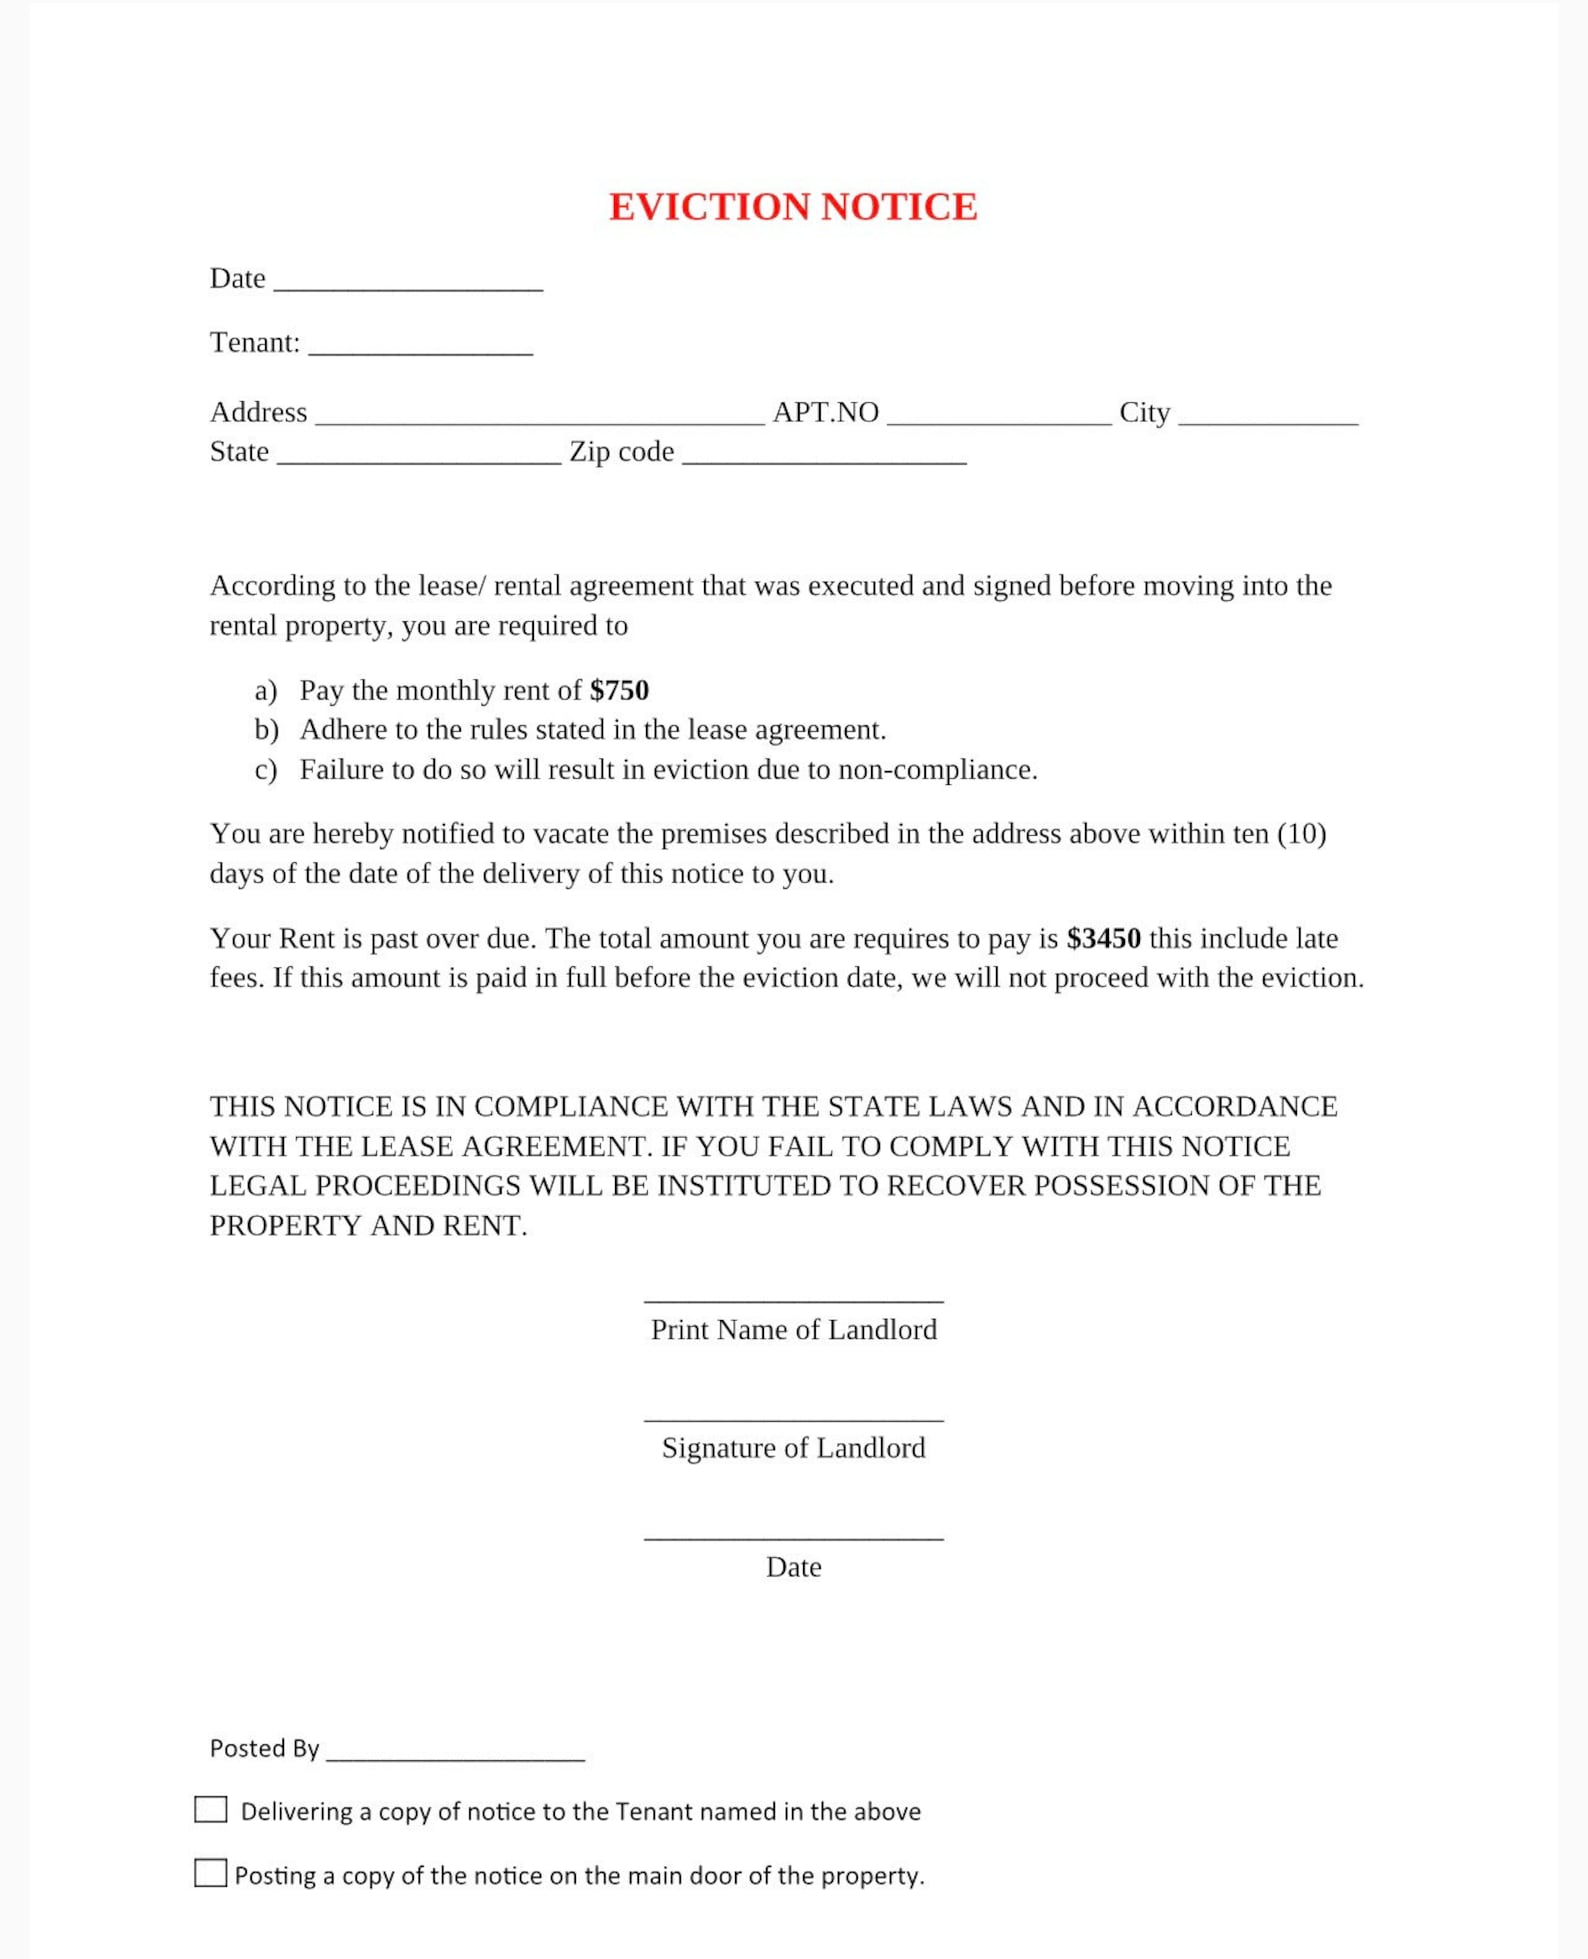 eviction-notice-notice-to-vacate-etsy-uk